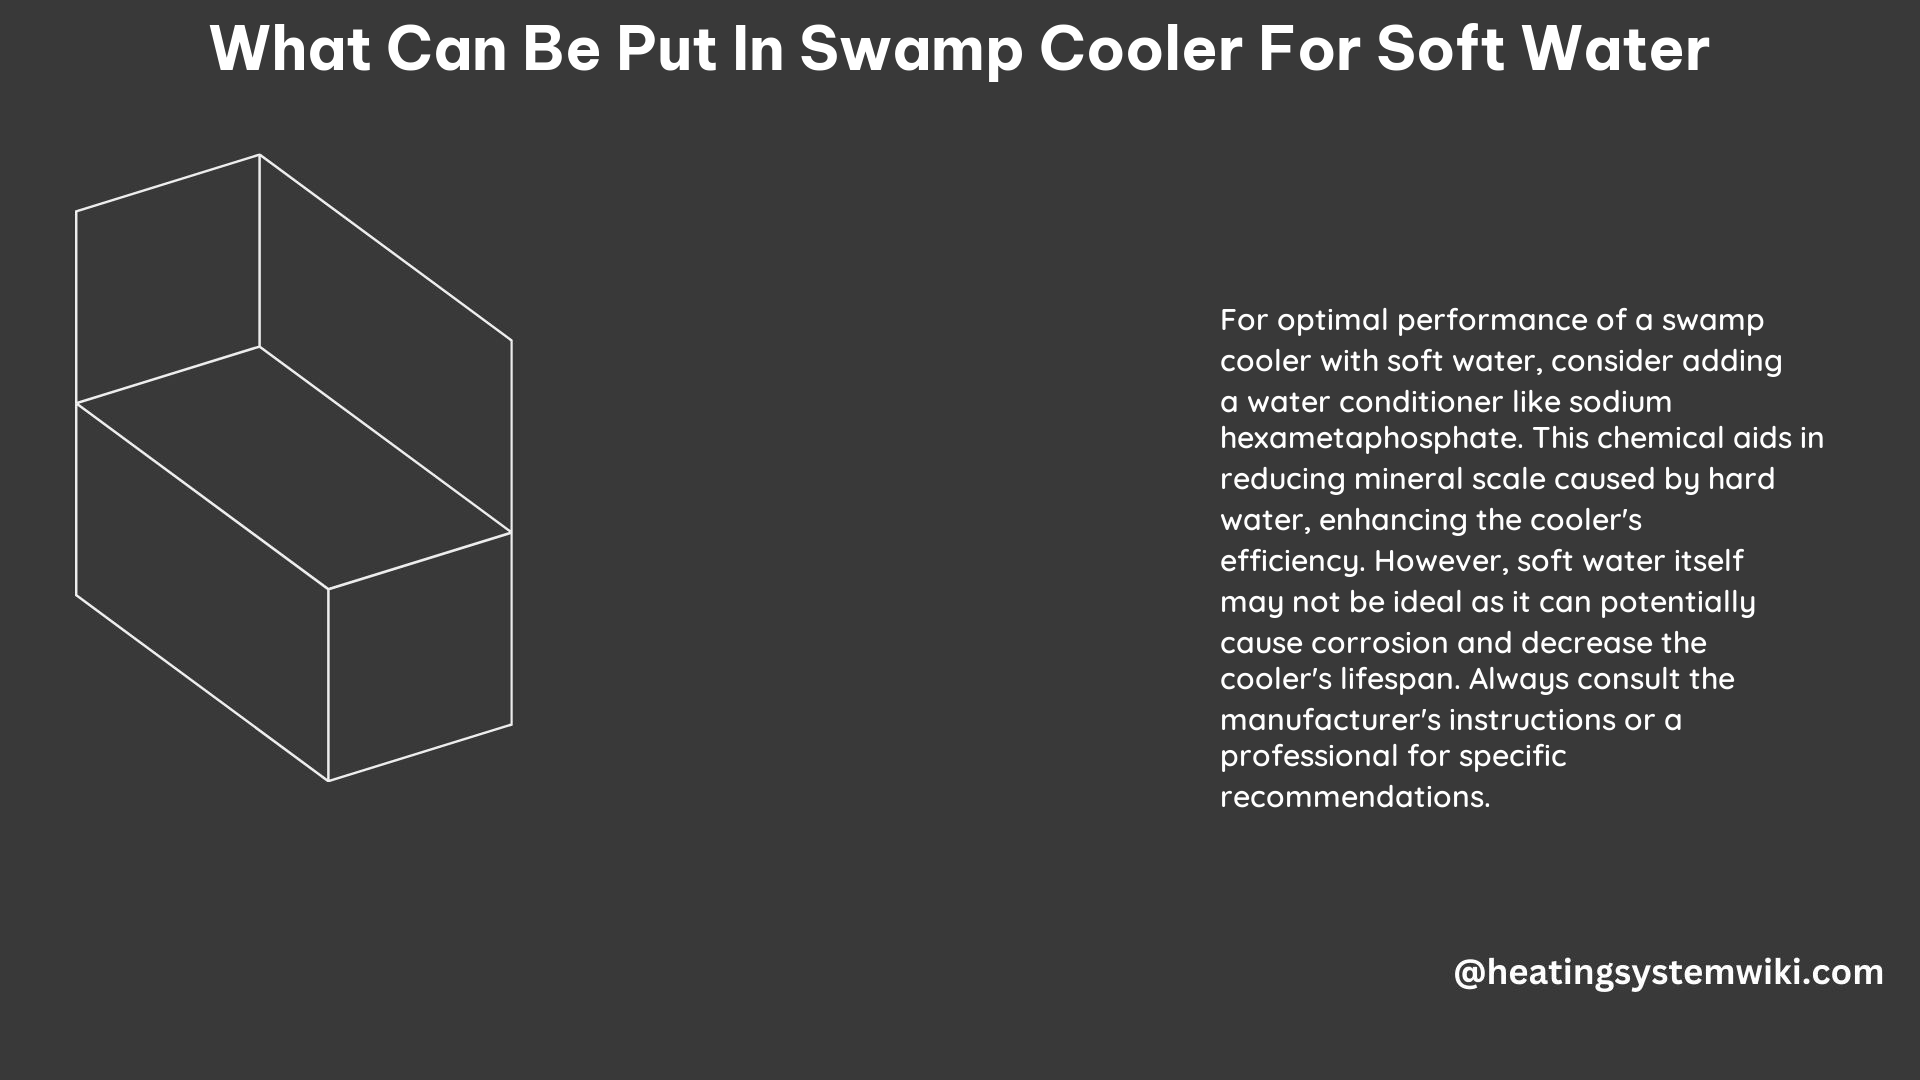 What Can Be Put in Swamp Cooler for Soft Water